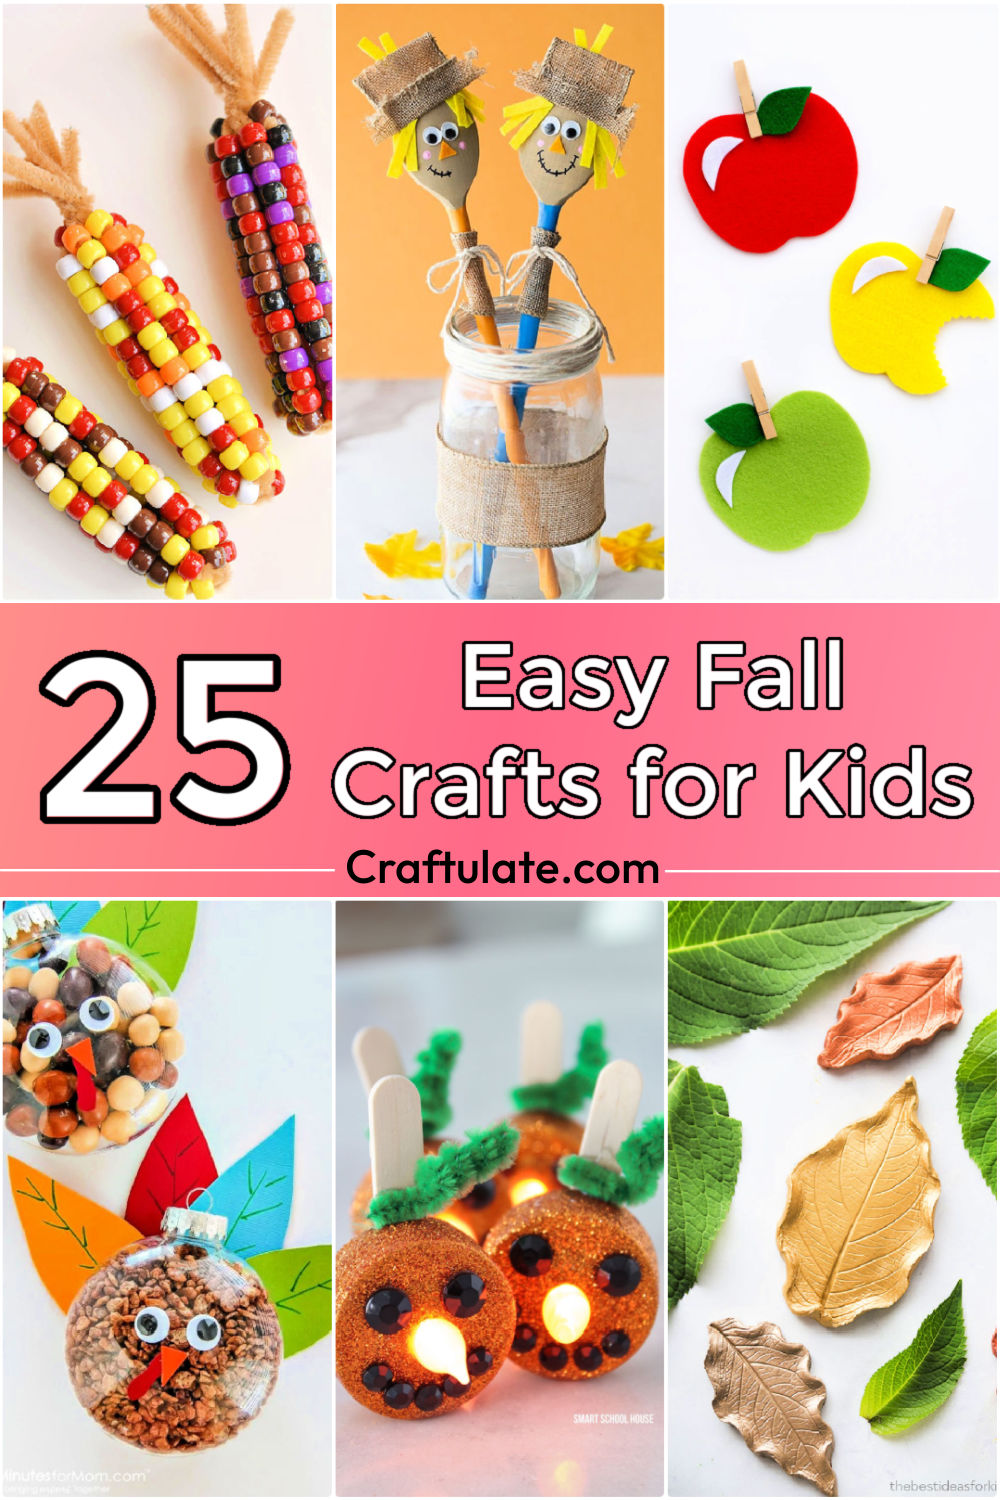 25 Easy Fall Crafts for Kids: October Craft Ideas - Craftulate